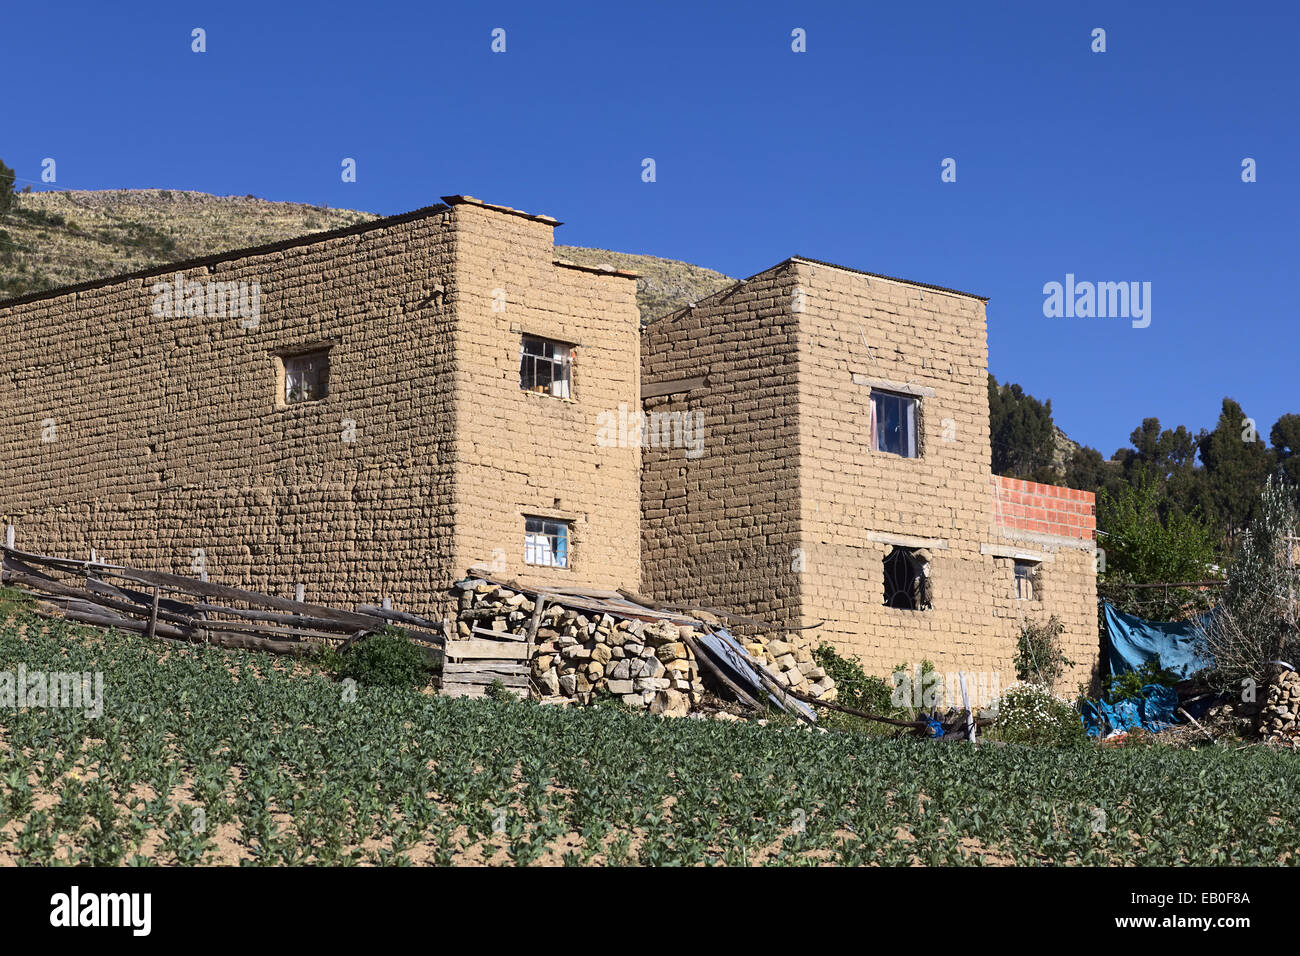 House built of adobe brick in the small town of Yampupata on the tip of the Yampupata Peninsula at Lake Titicaca in Bolivia Stock Photo